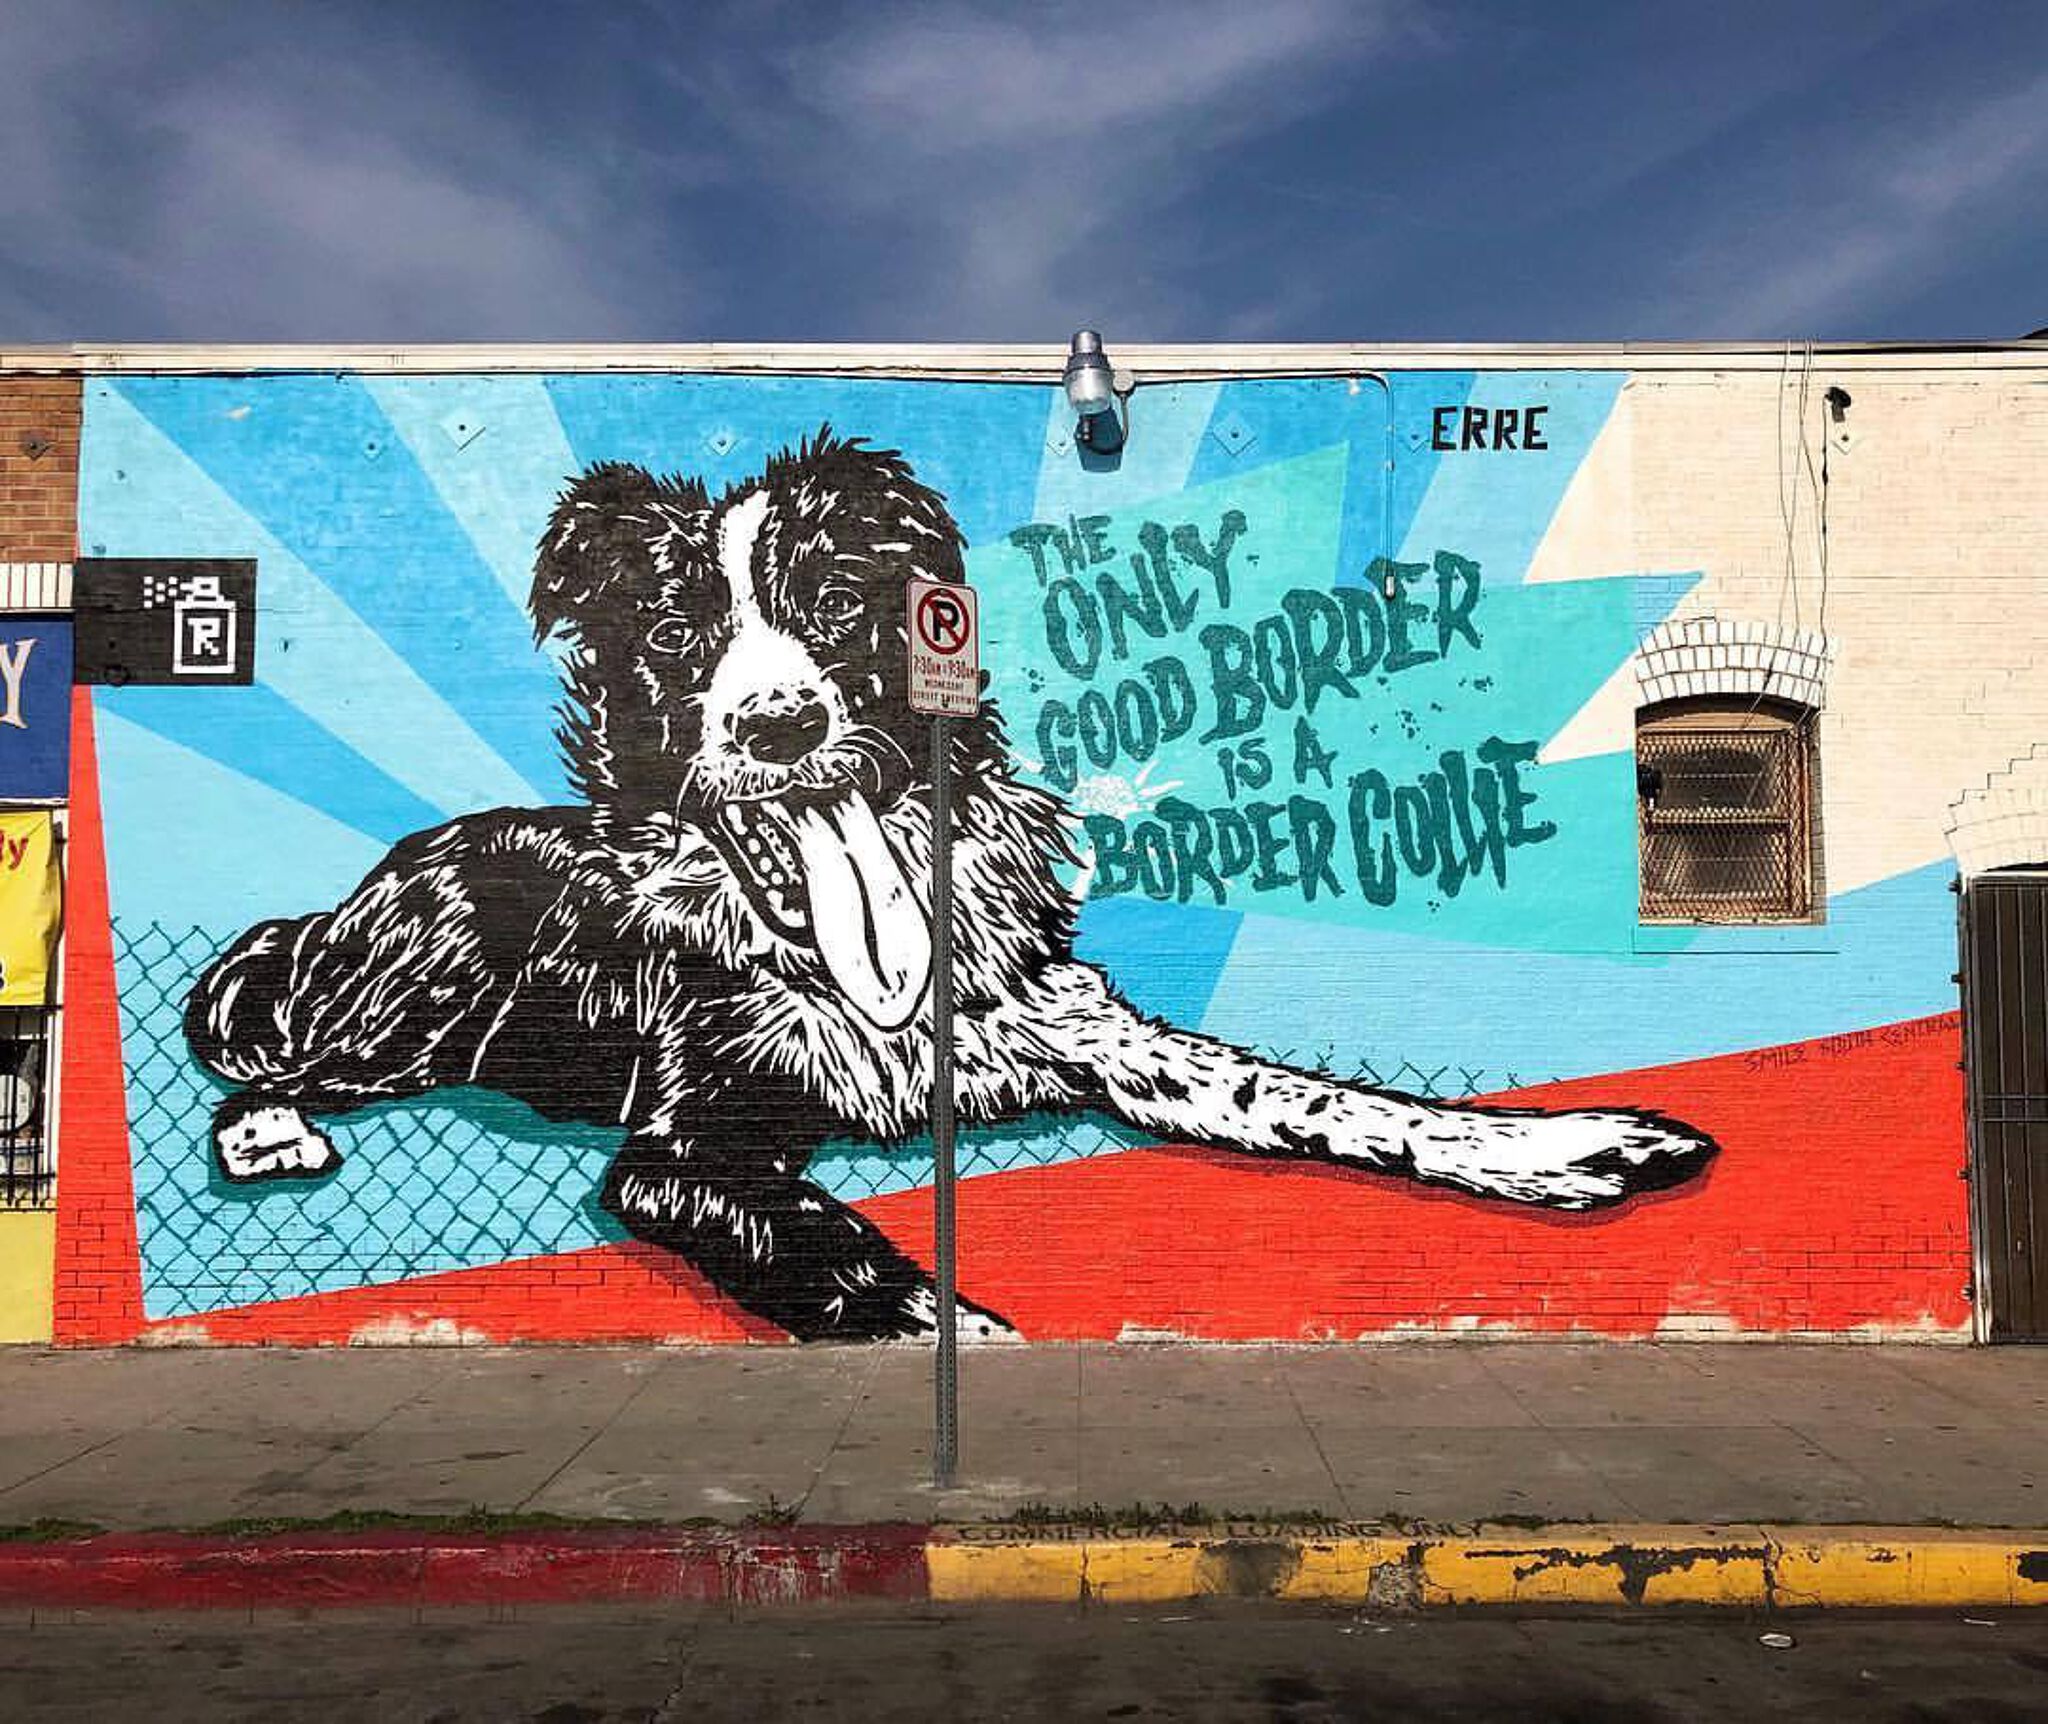 Erre&mdash;The Only Good Border Is A Border Collie